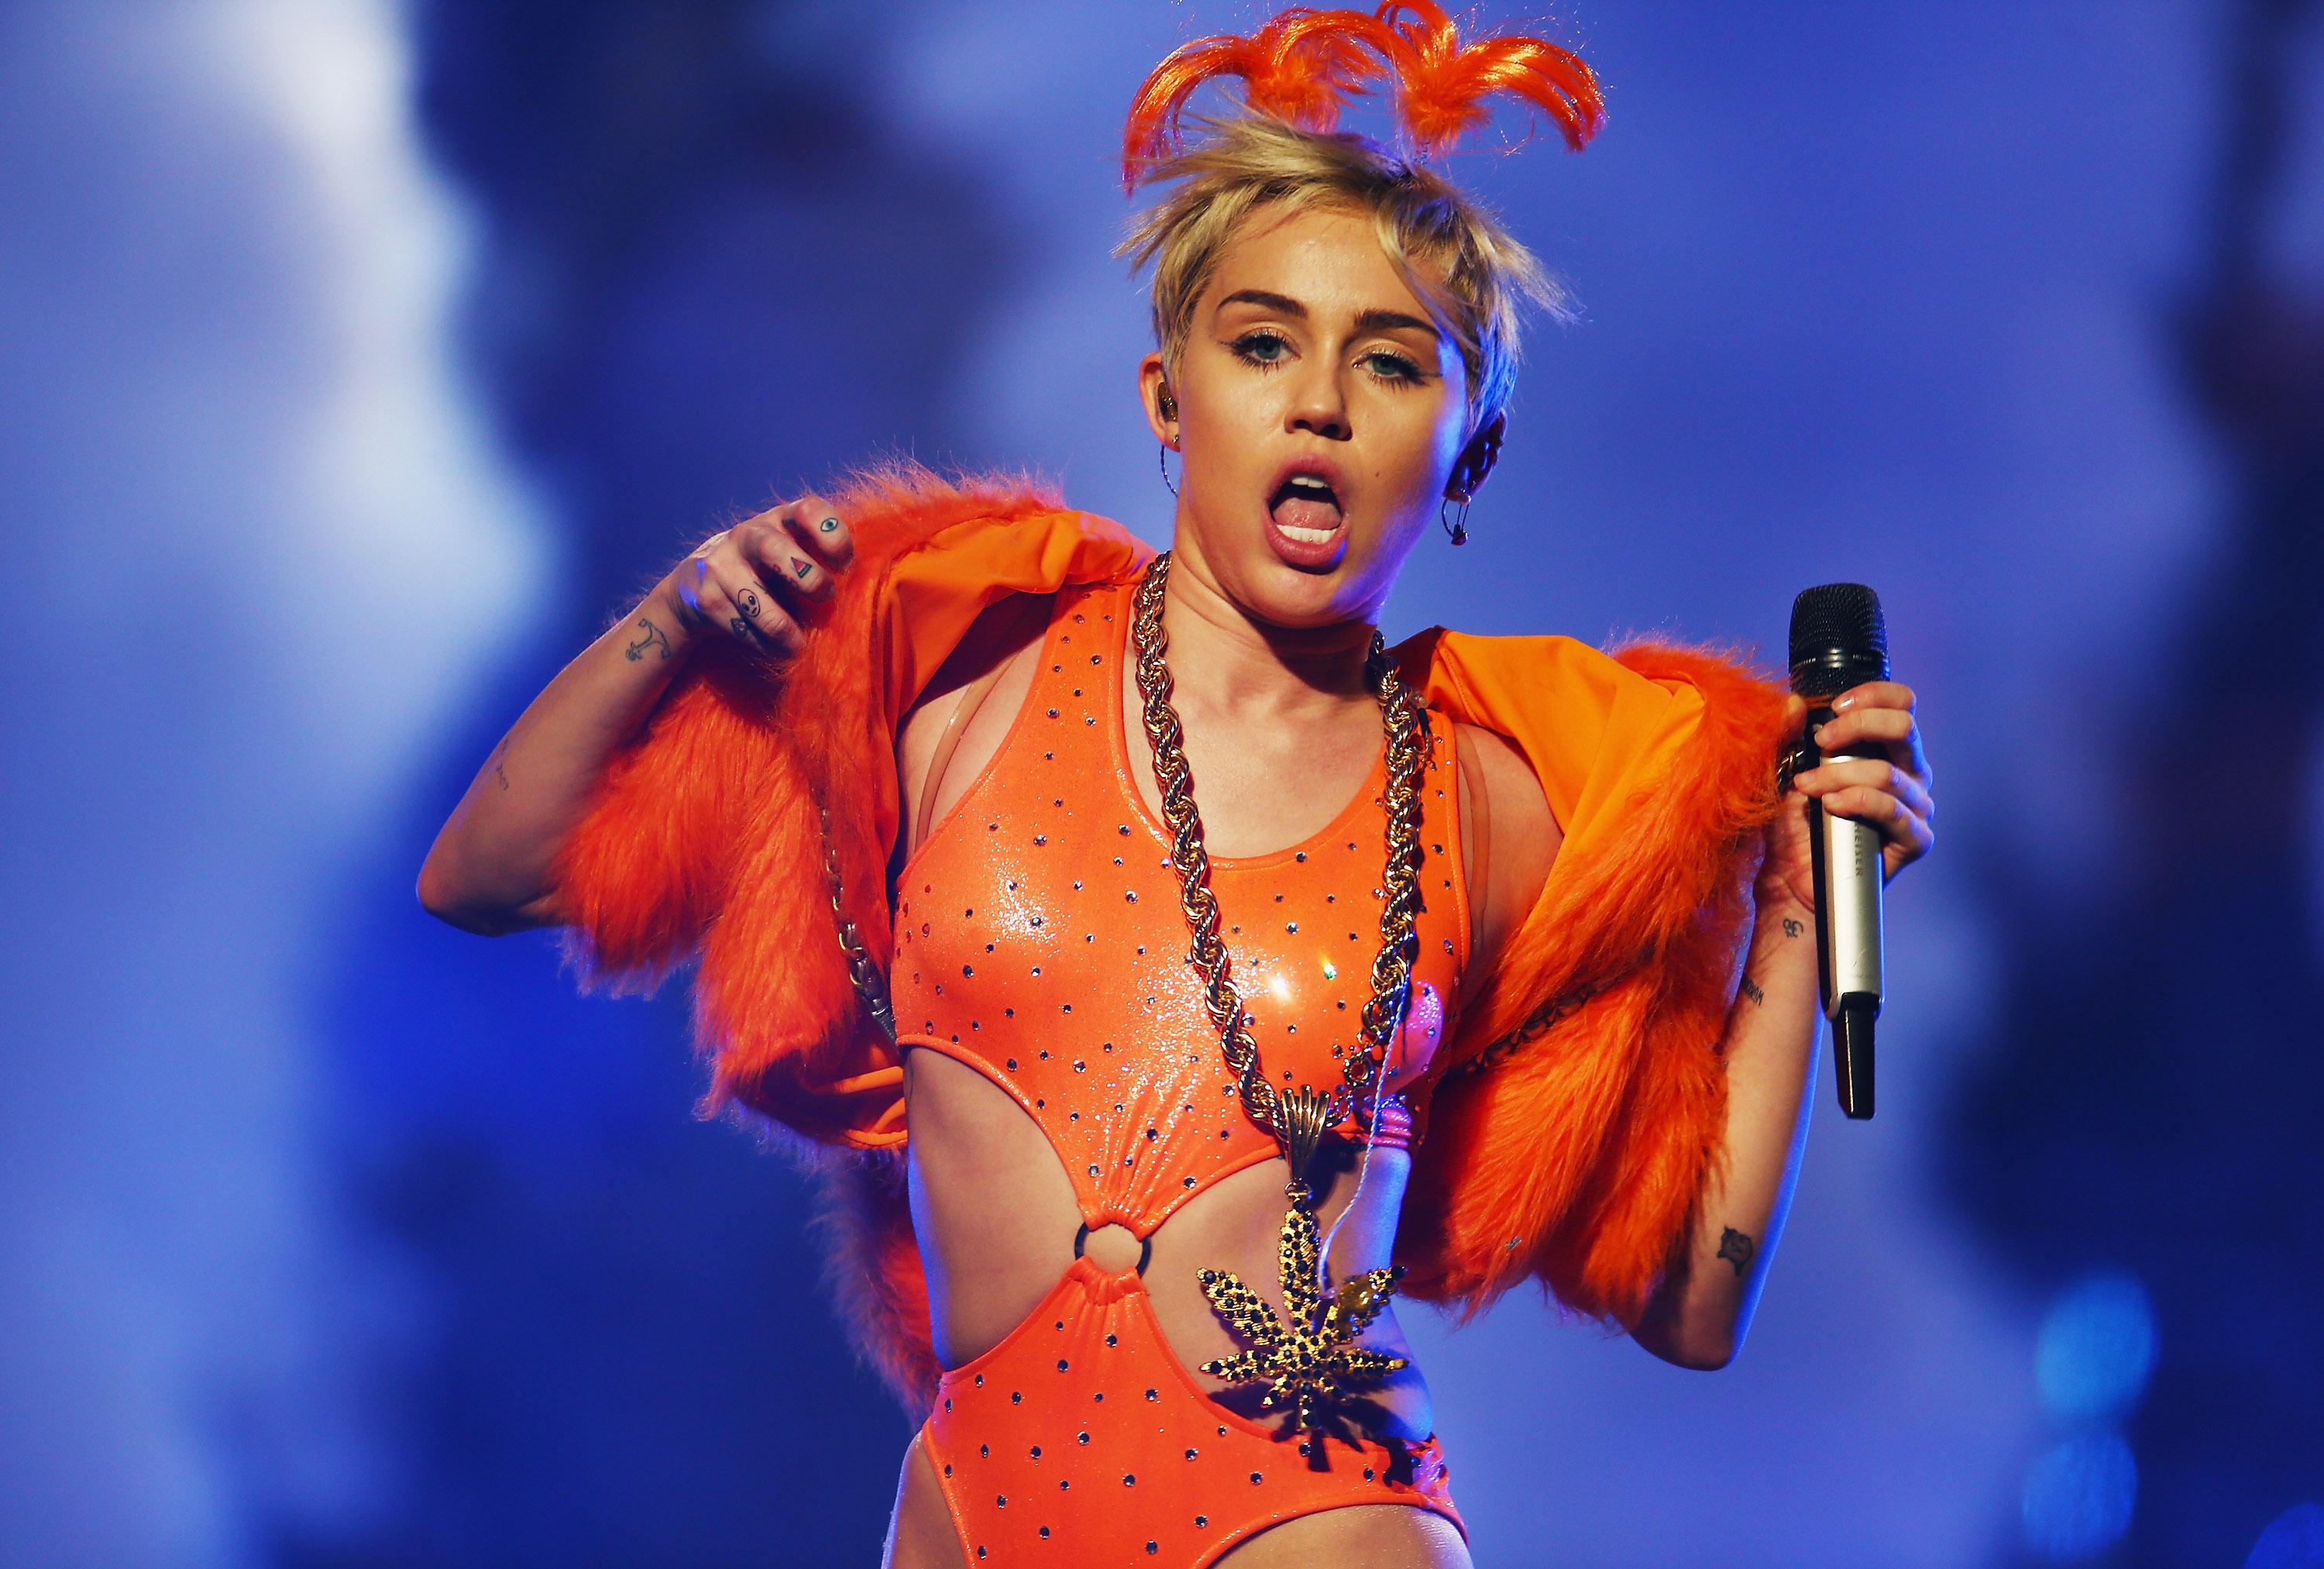 Miley Cyrus Pornography - Miley Cyrus film pulled from porn festival - NZ Herald